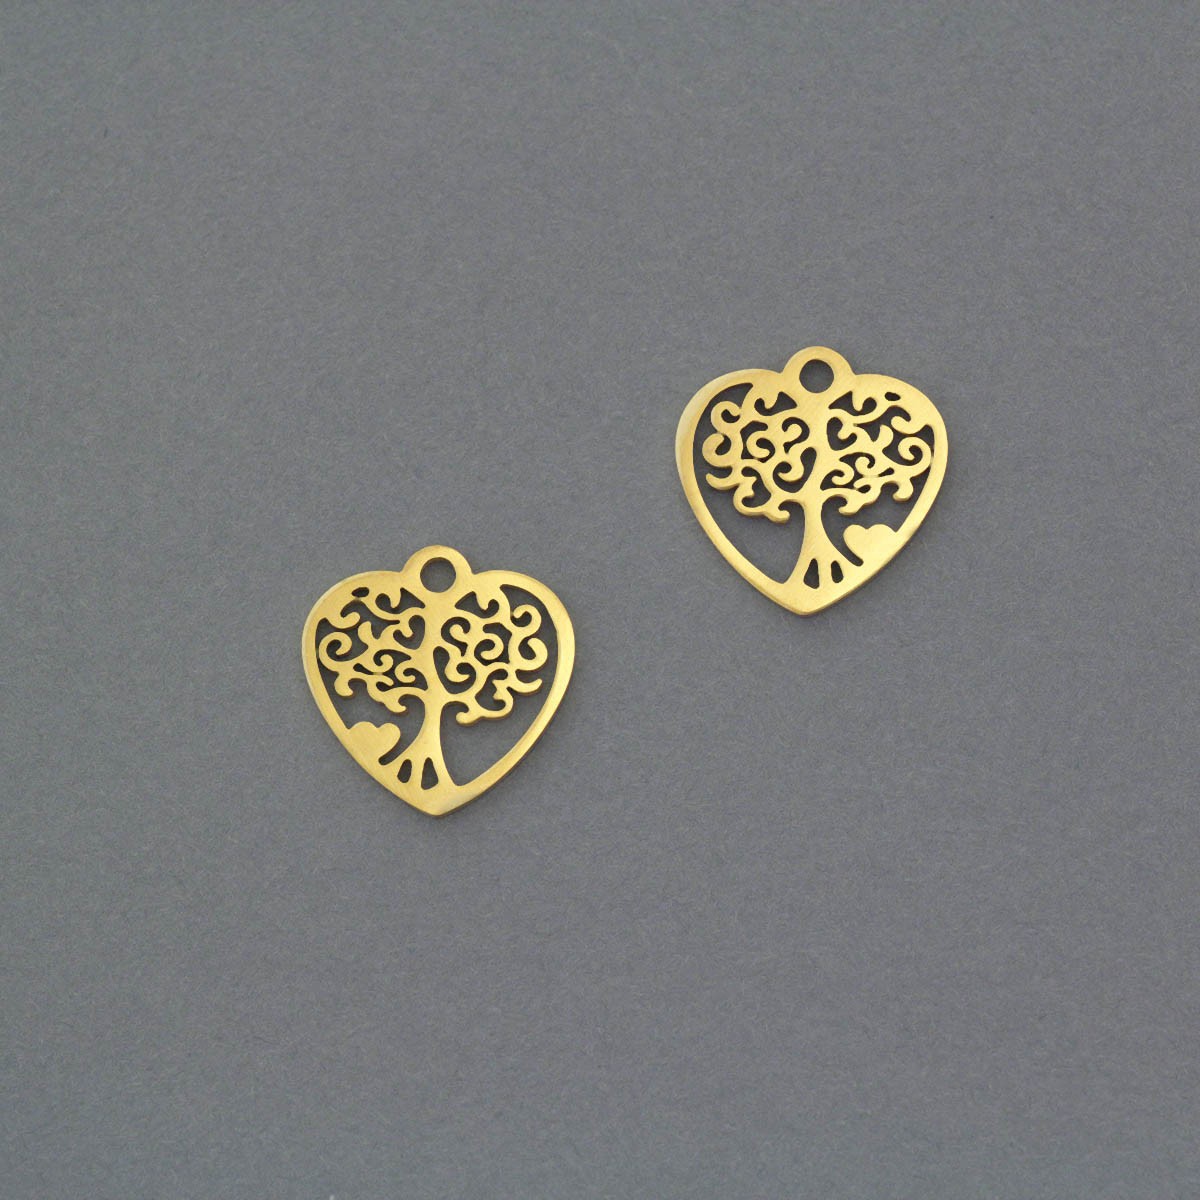 Tree of life pendant / surgical steel gold-plated / 15mm 1pc AKGSCH005